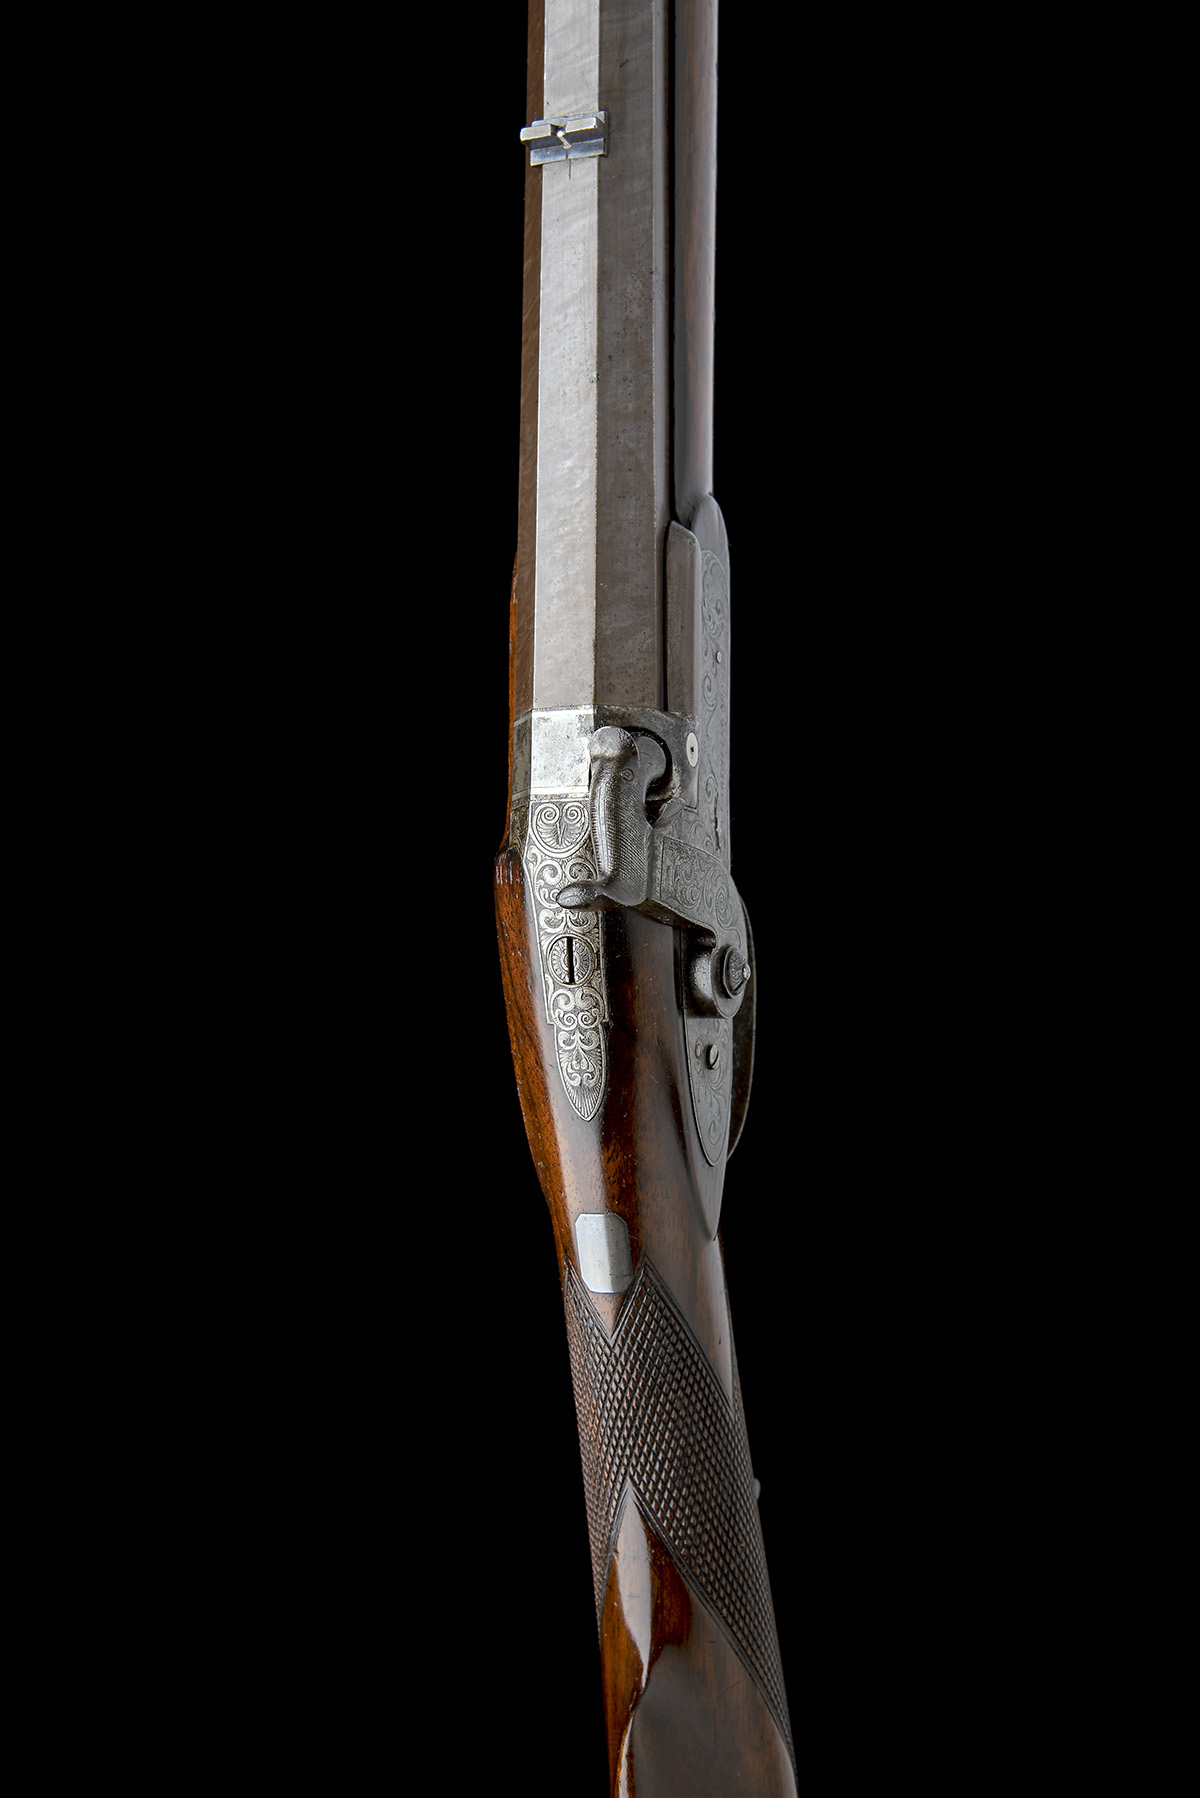 CARTMELL & SON, DONCASTER A GOOD 16-BORE PERCUSSION SINGLE-BARRELLED SPORTING-RIFLE, serial no. - Image 6 of 8